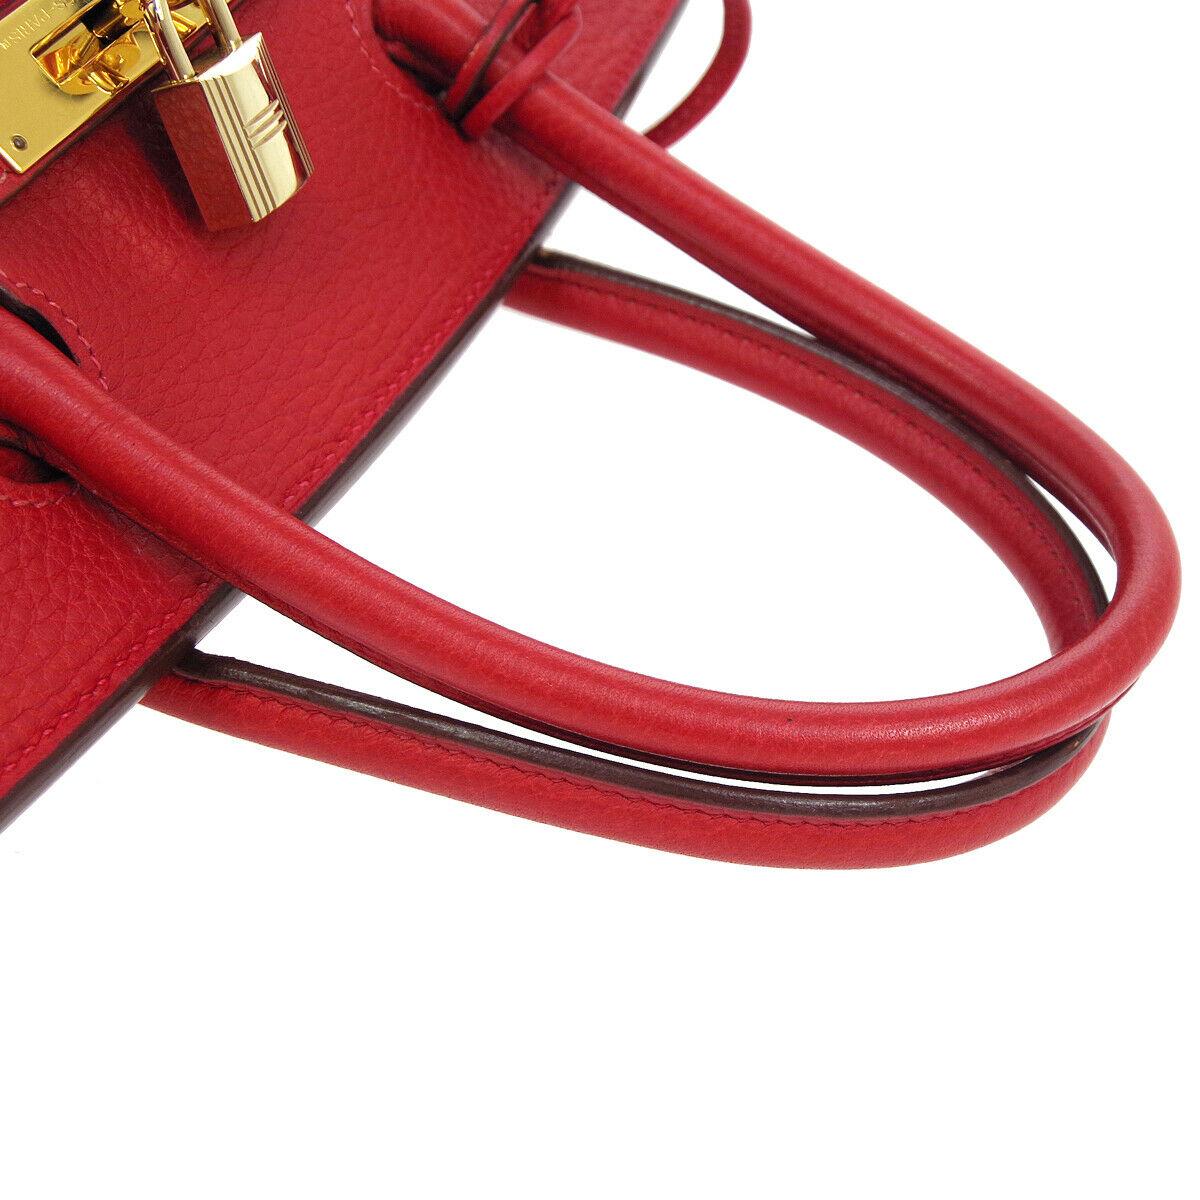 Hermes Birkin 30 Lipstick Red Leather Gold Top Handle Satchel Tote Bag

Leather
Gold tone hardware
Leather lining
Date code present
Made in France
Handle drop 3.5